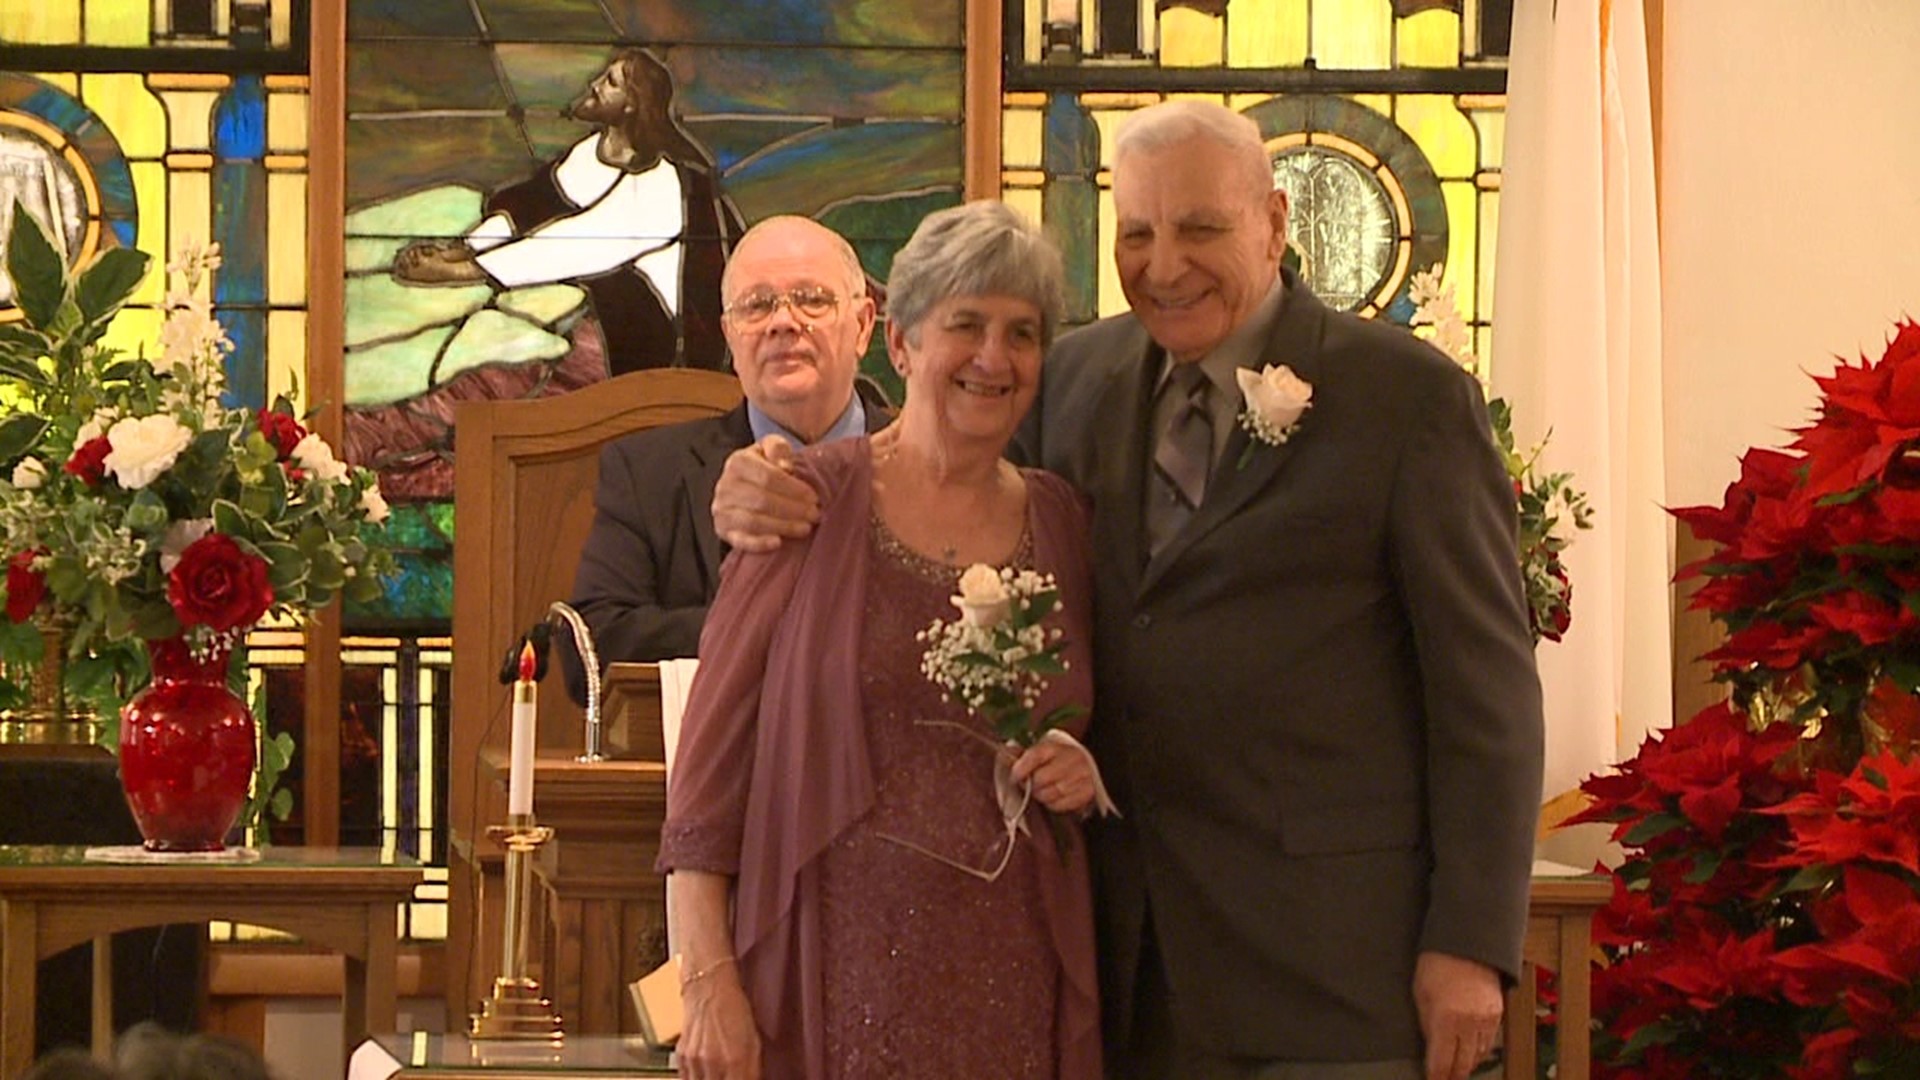 A Luzerne County couple proved love has no timeline on Saturday as they tied the knot in their 80s.